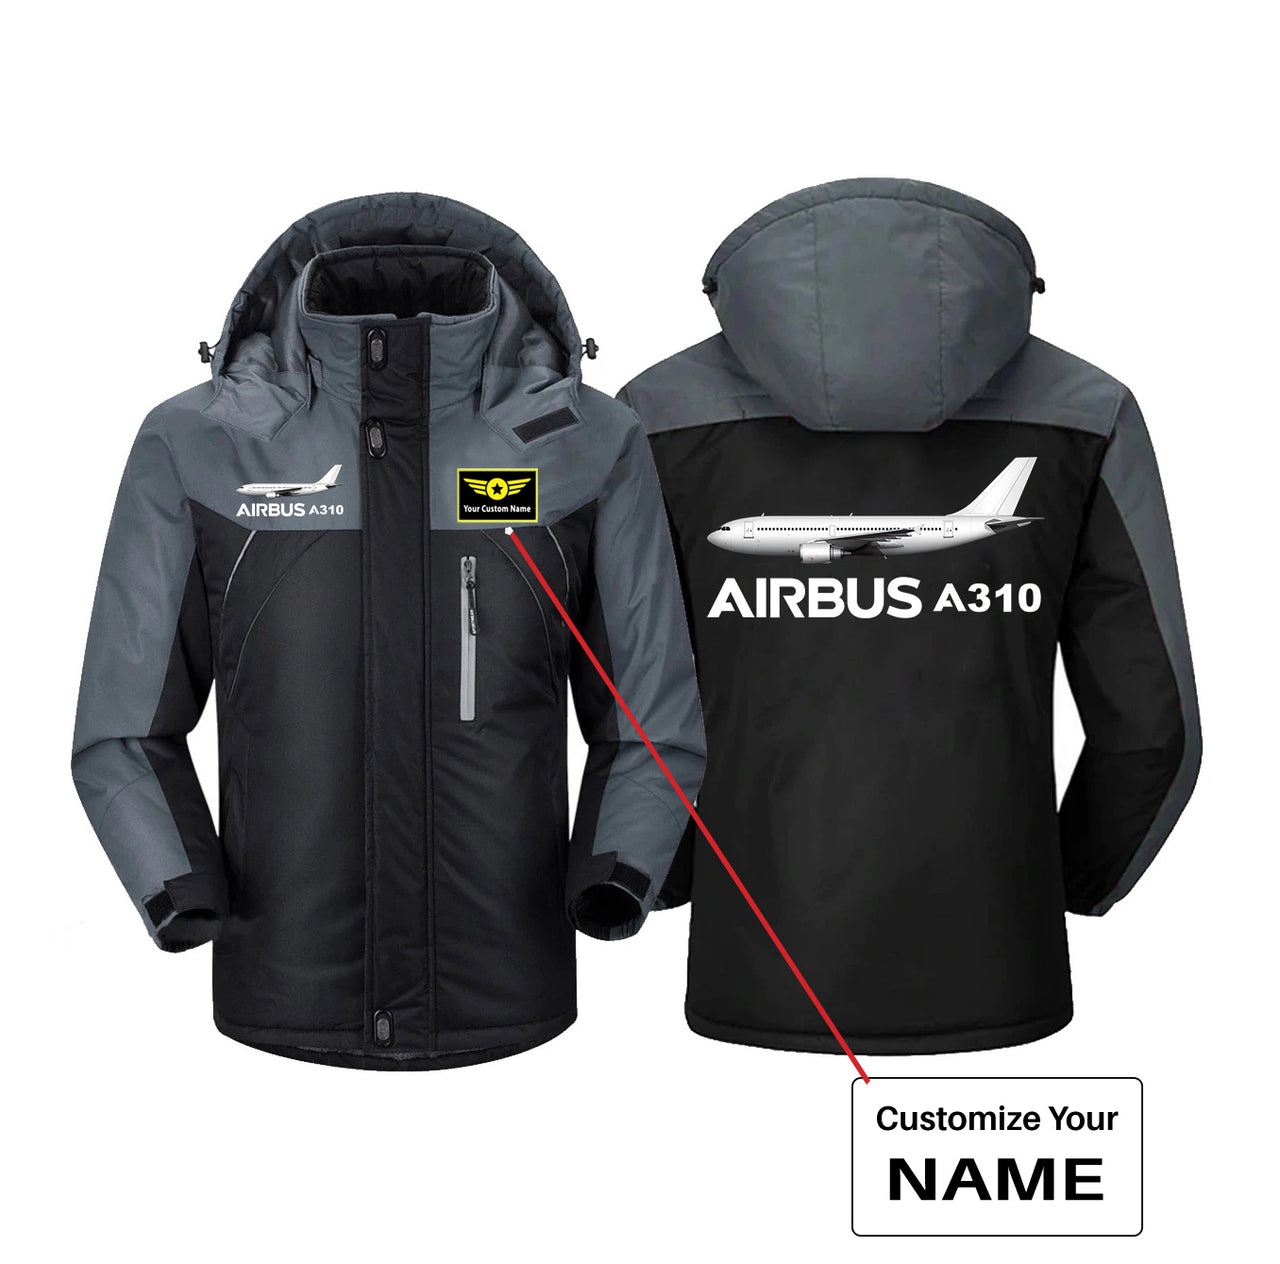 The Airbus A310 Designed Thick Winter Jackets